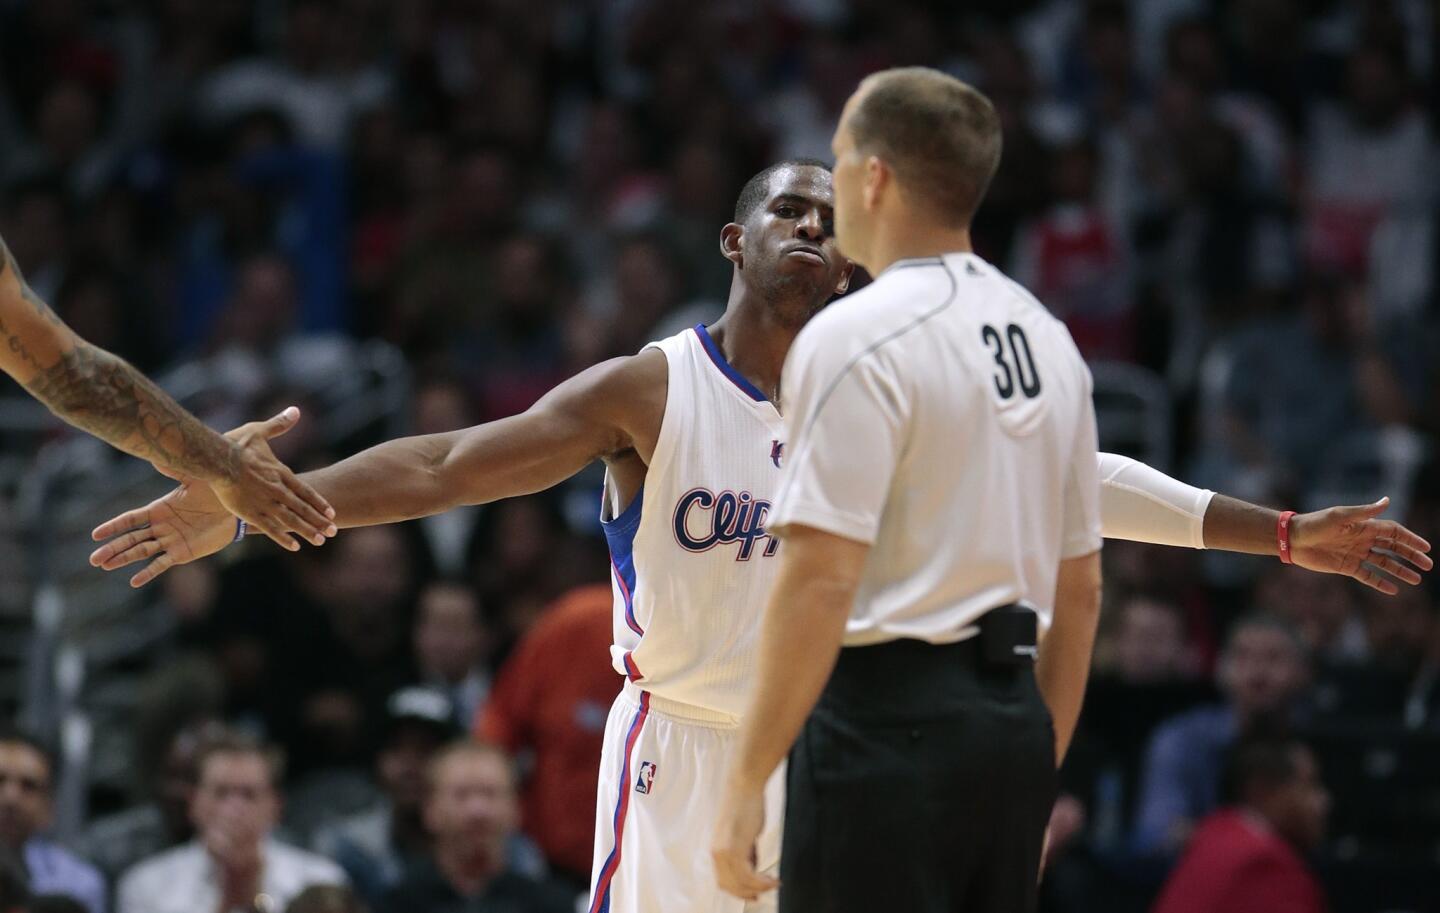 Clippers point guard Chris Paul reaches out for a congratulatory hand slap after hitting a tough shot and drawing a foul against the Thunder in the third quarter.